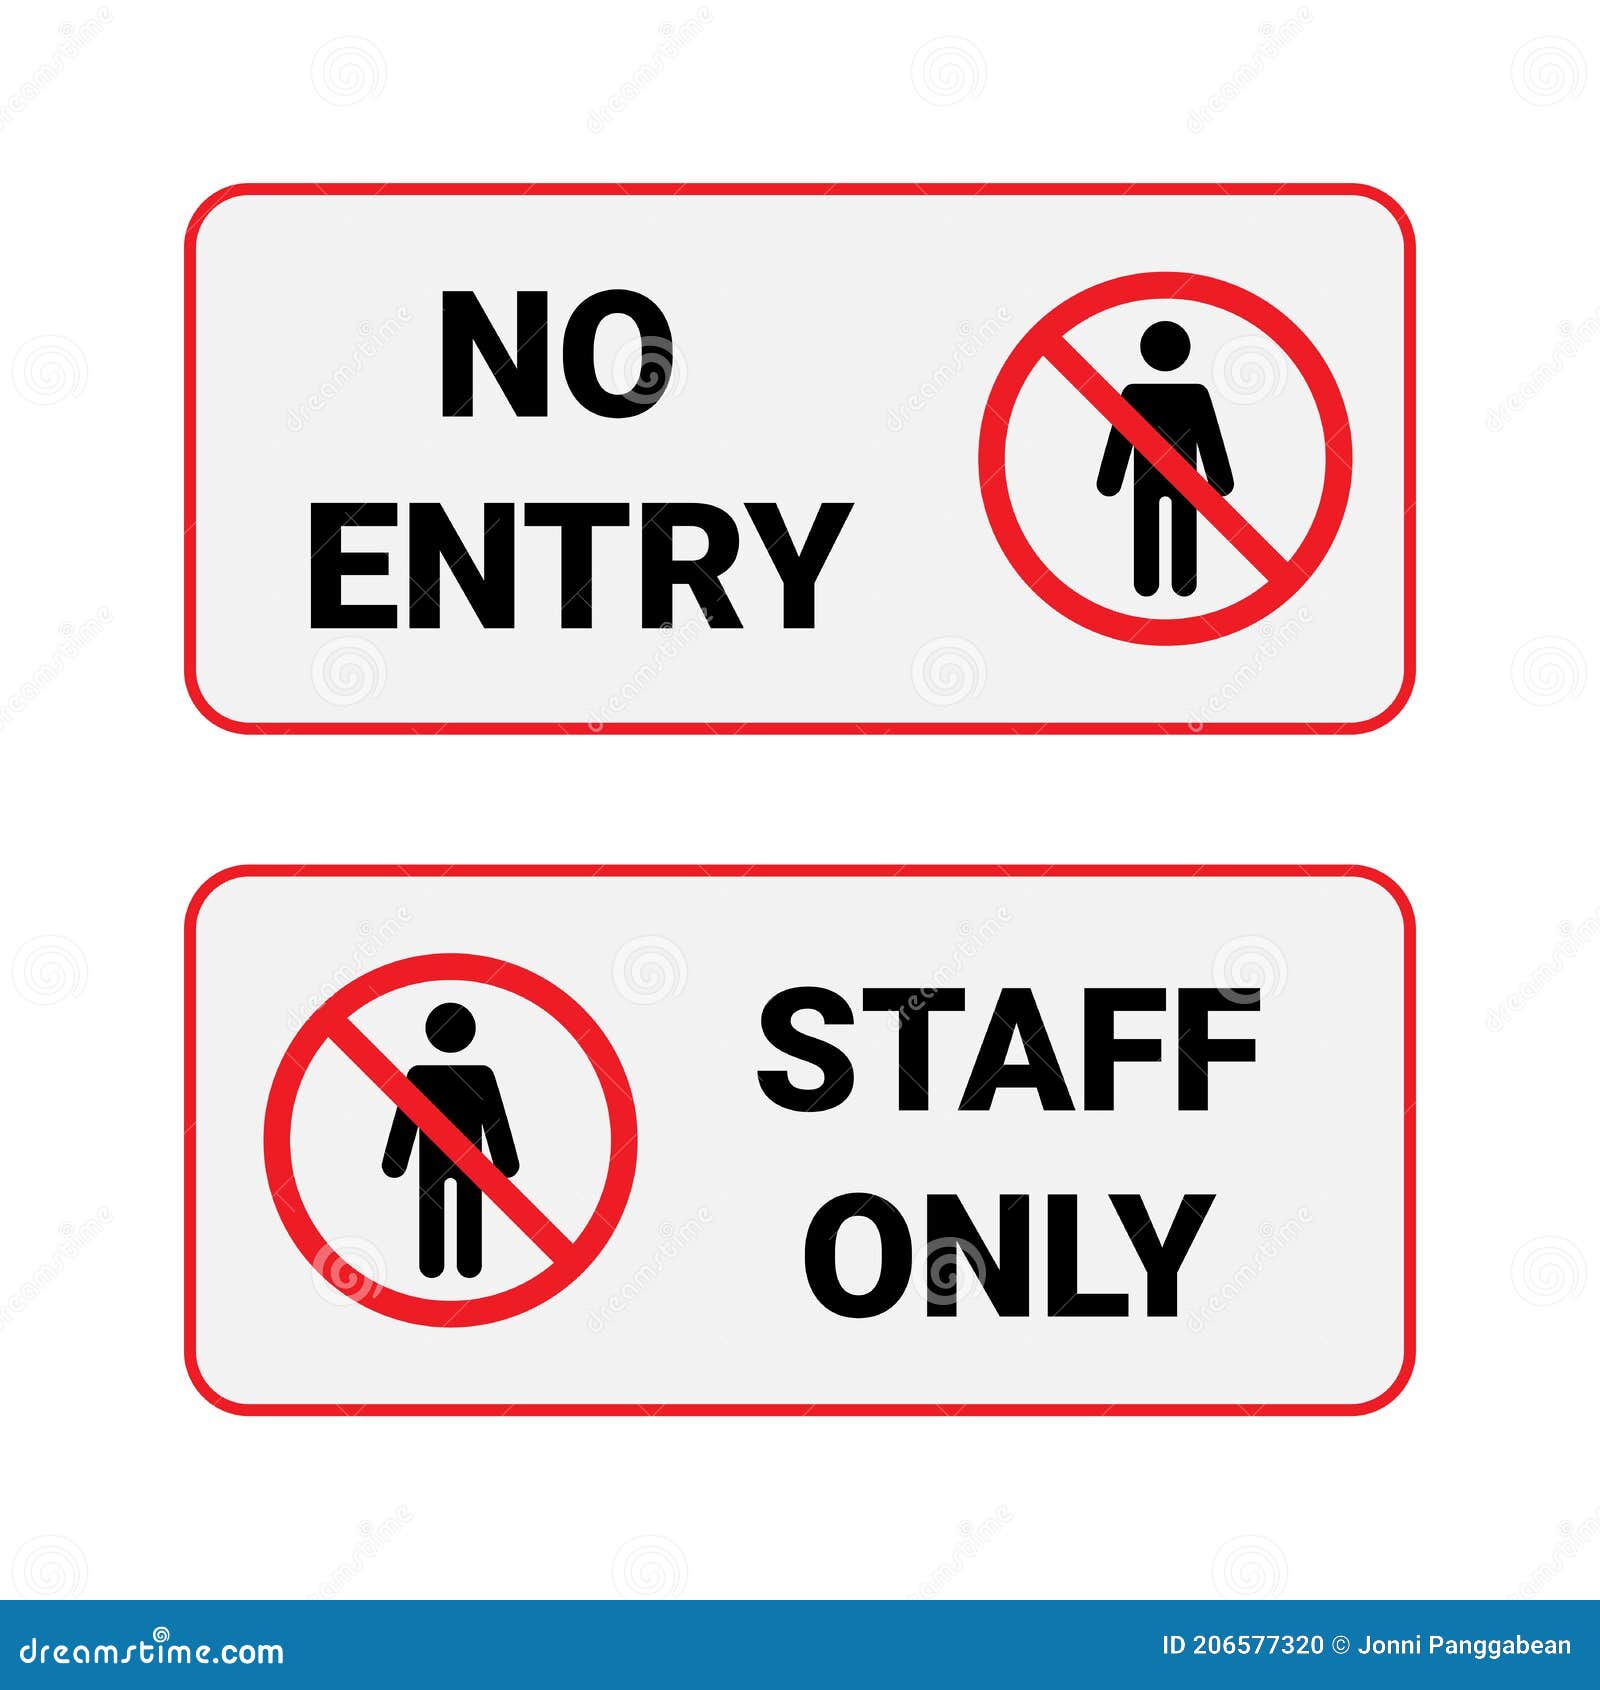 No entry staff only Safety sign 